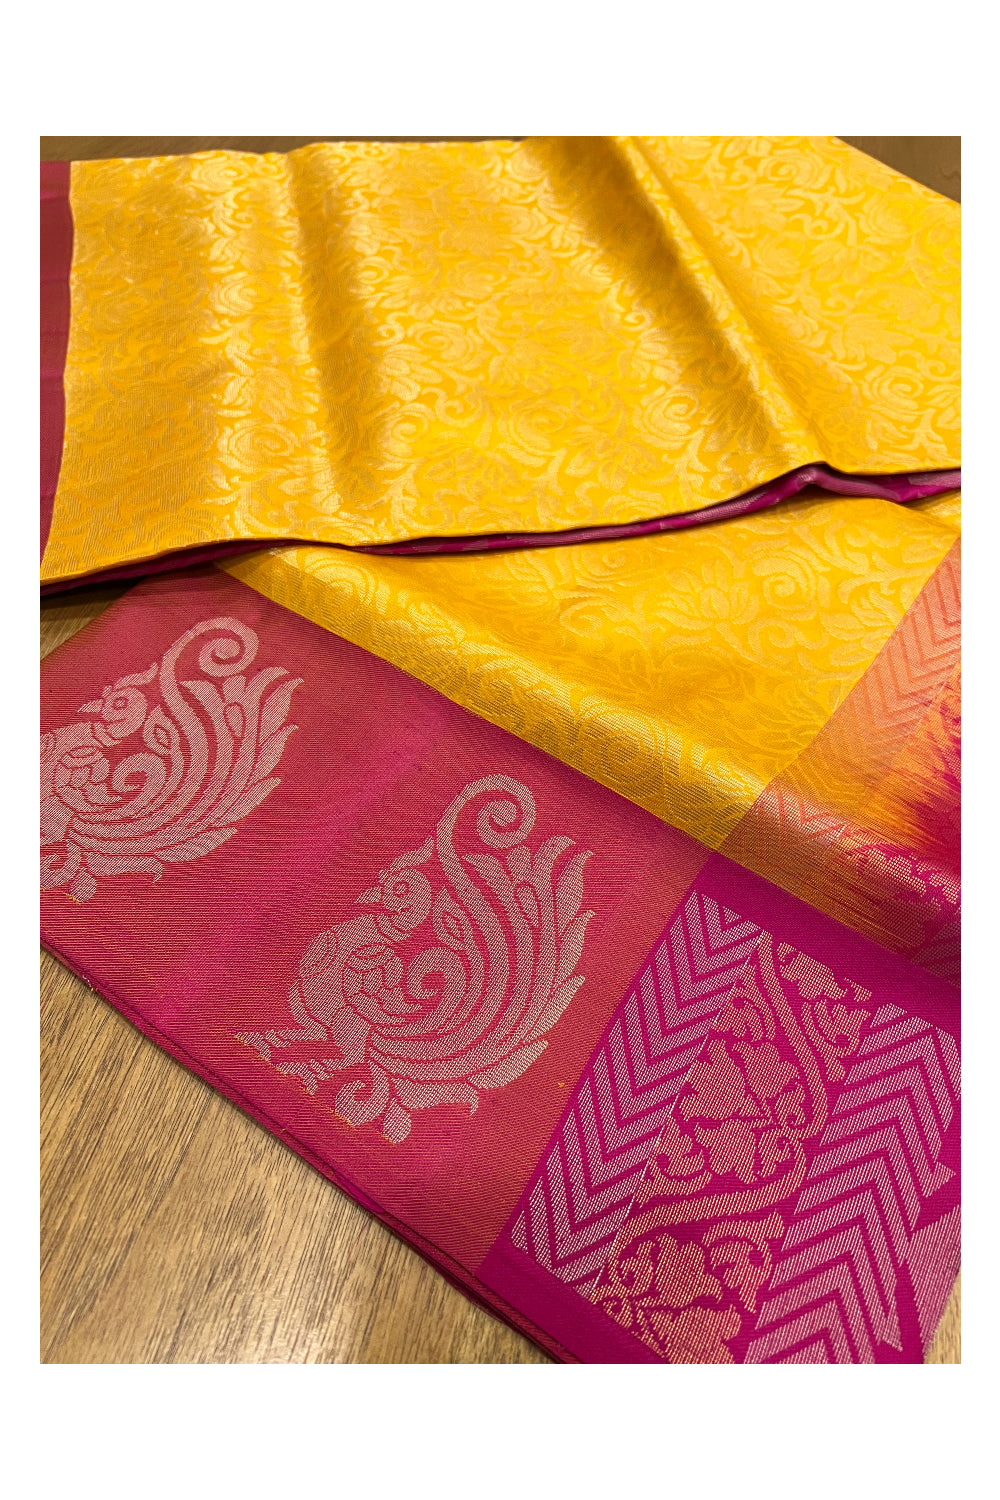 Southloom Handloom Pure Silk Kanchipuram Saree with Floral Work on Yellow Body and Rose Blouse Piece